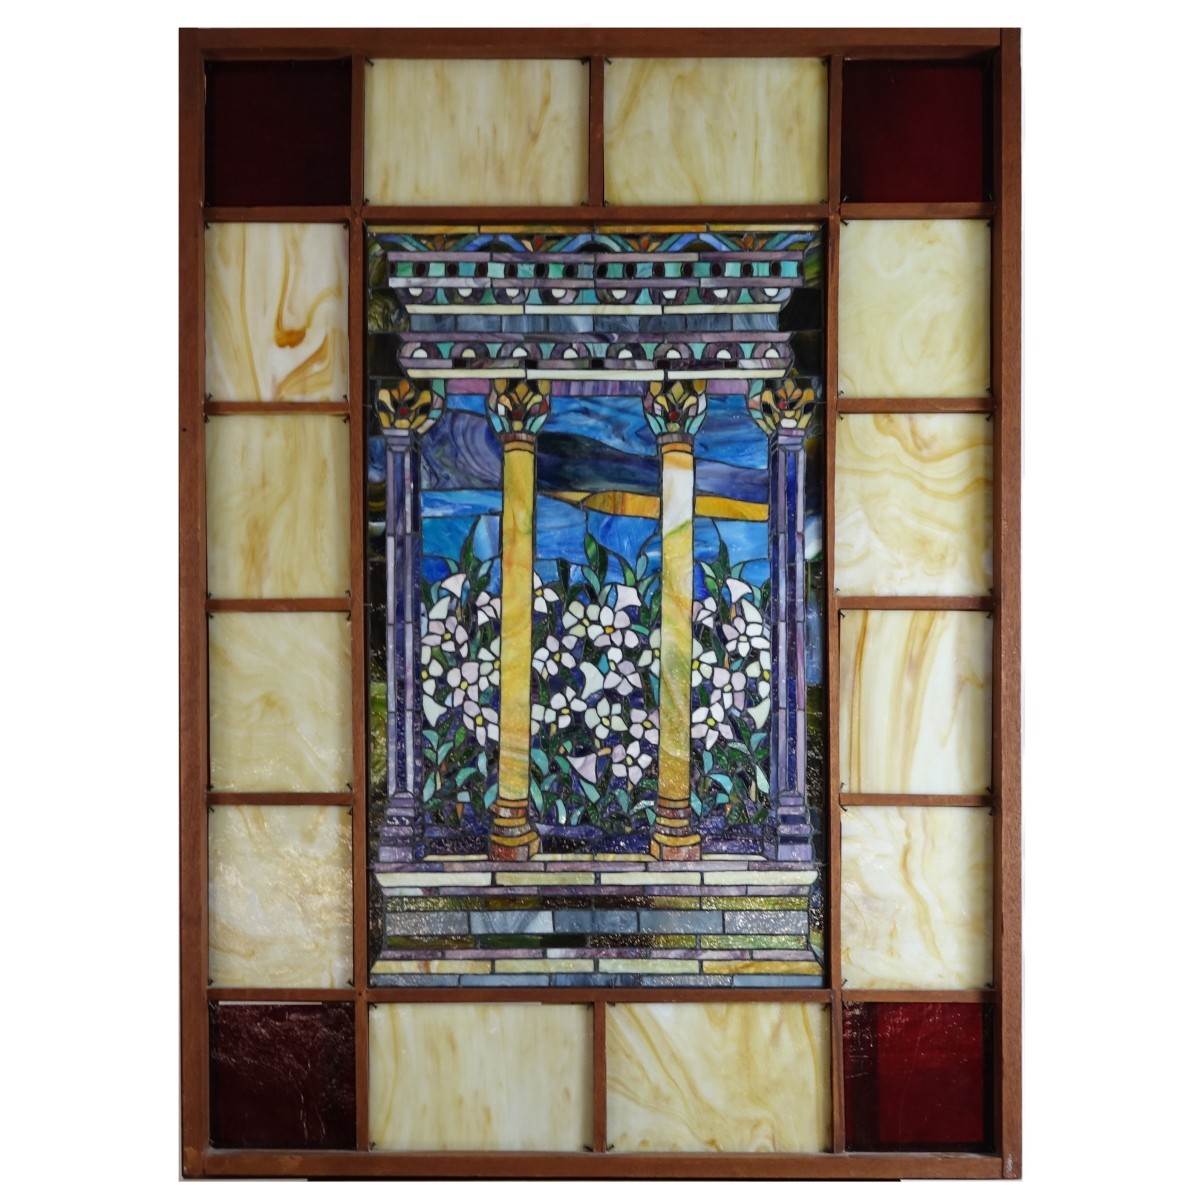 Large 20th C. Stained Glass Window